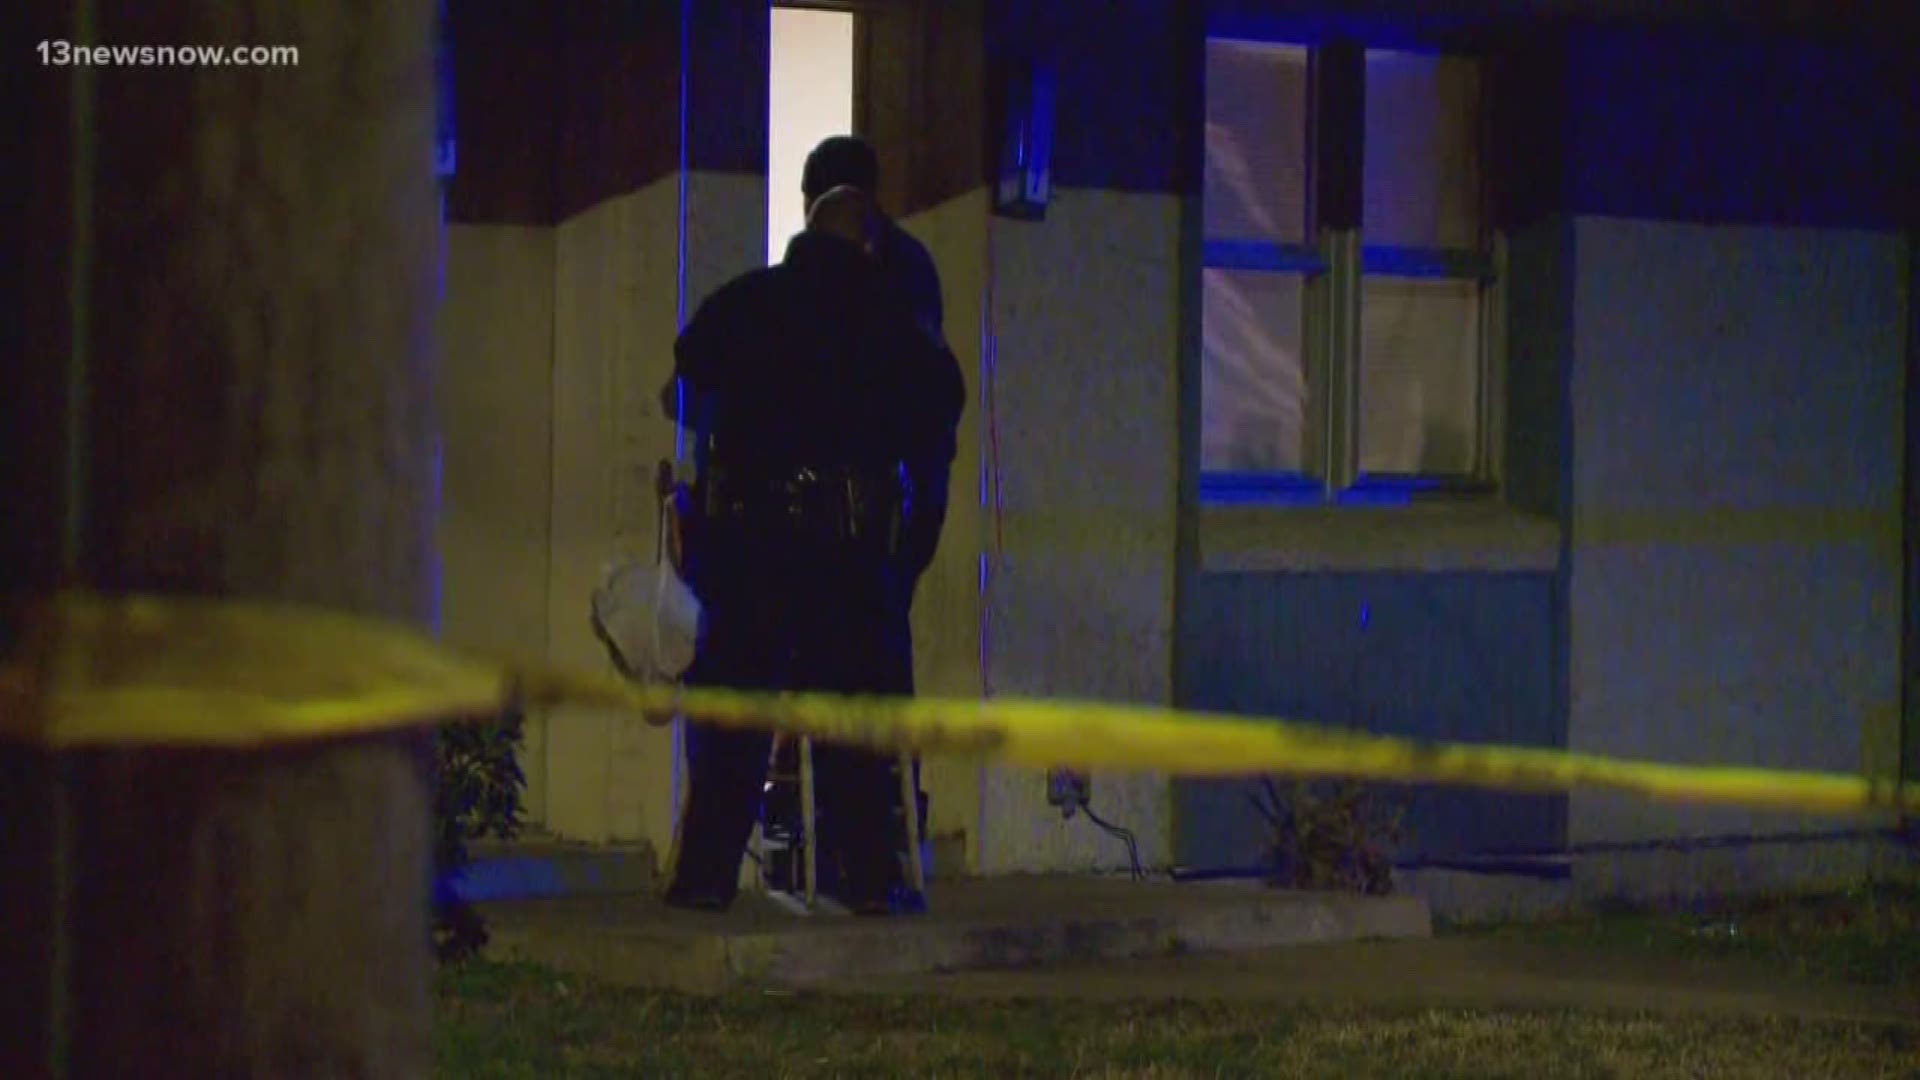 Police are investigating after two men were hurt in a shooting in Newport News.